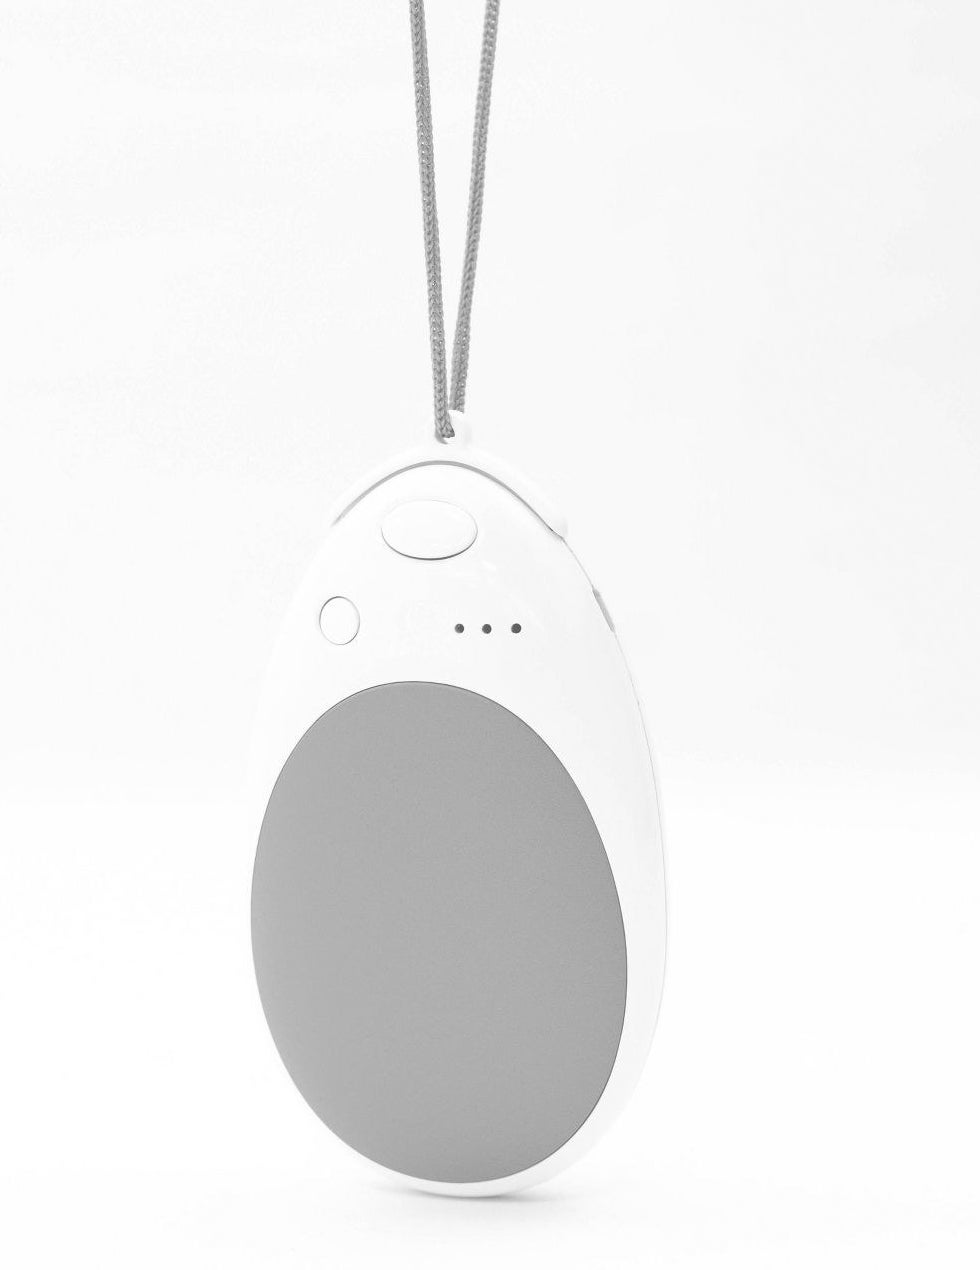 The rechargeable, wearable necklace hand warmer